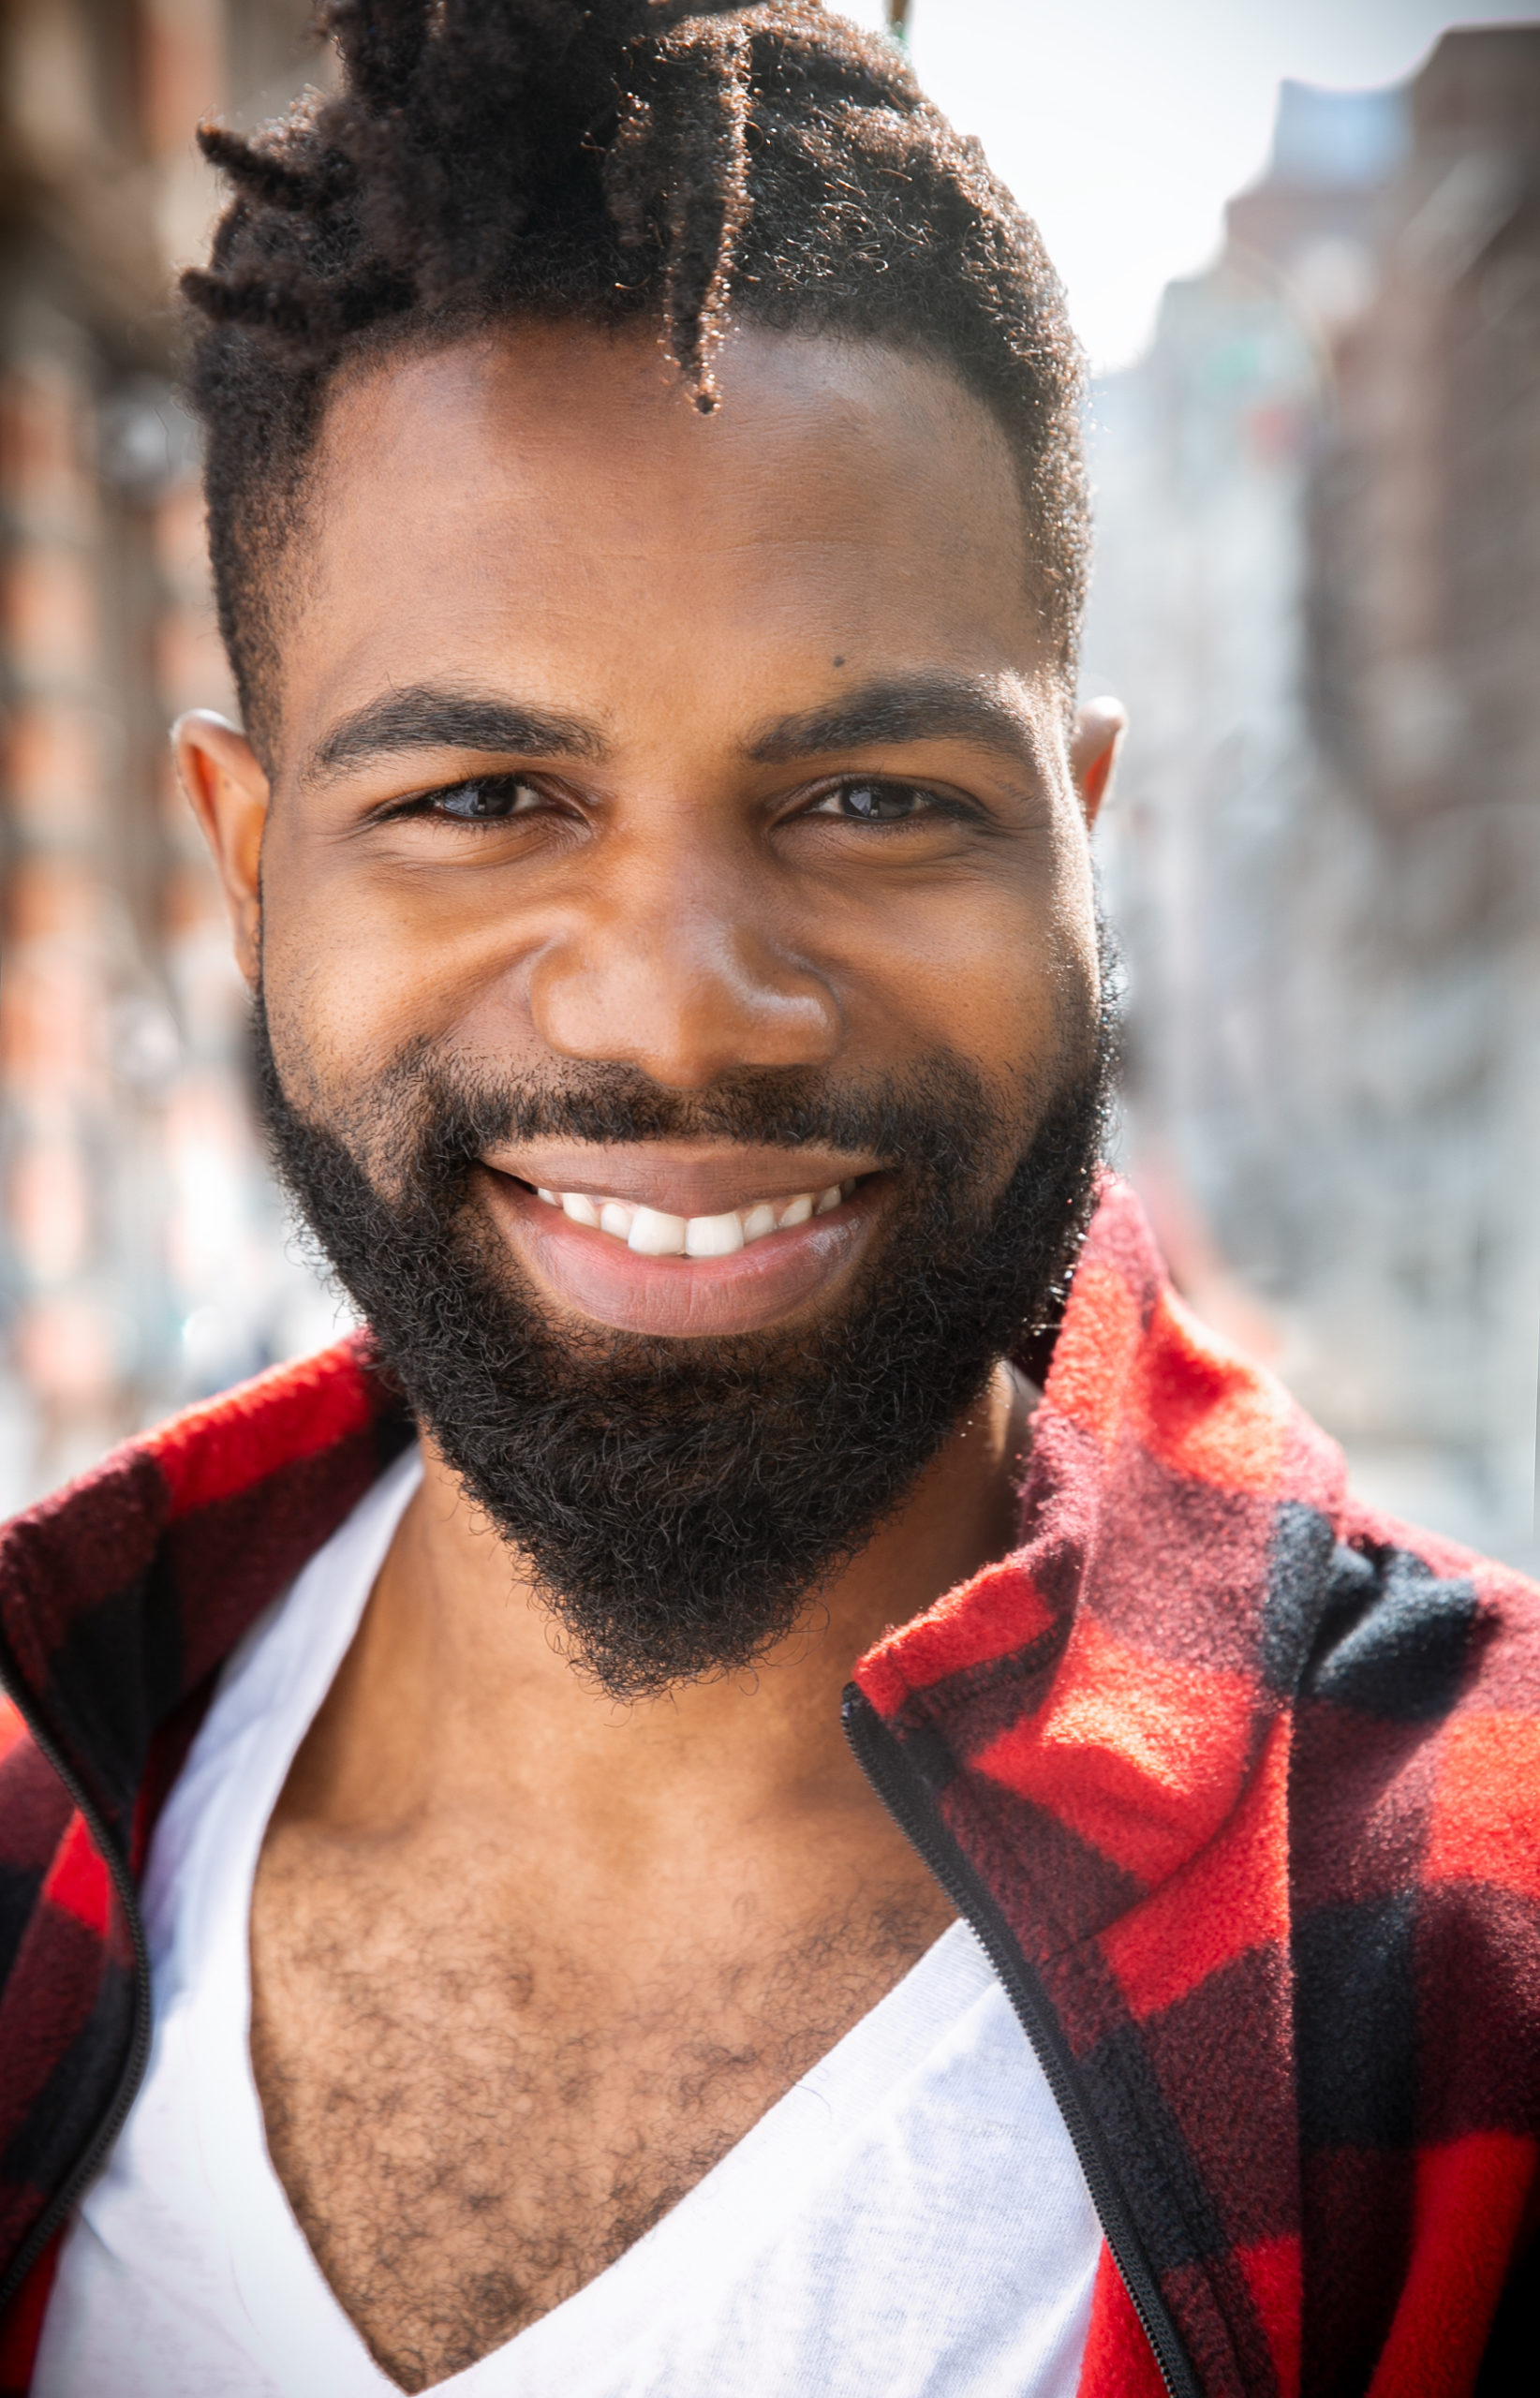 Black man in white v-neck t-shirt and red and black checkered flannel with a beard and short dreadlocked hair smiling at the camera